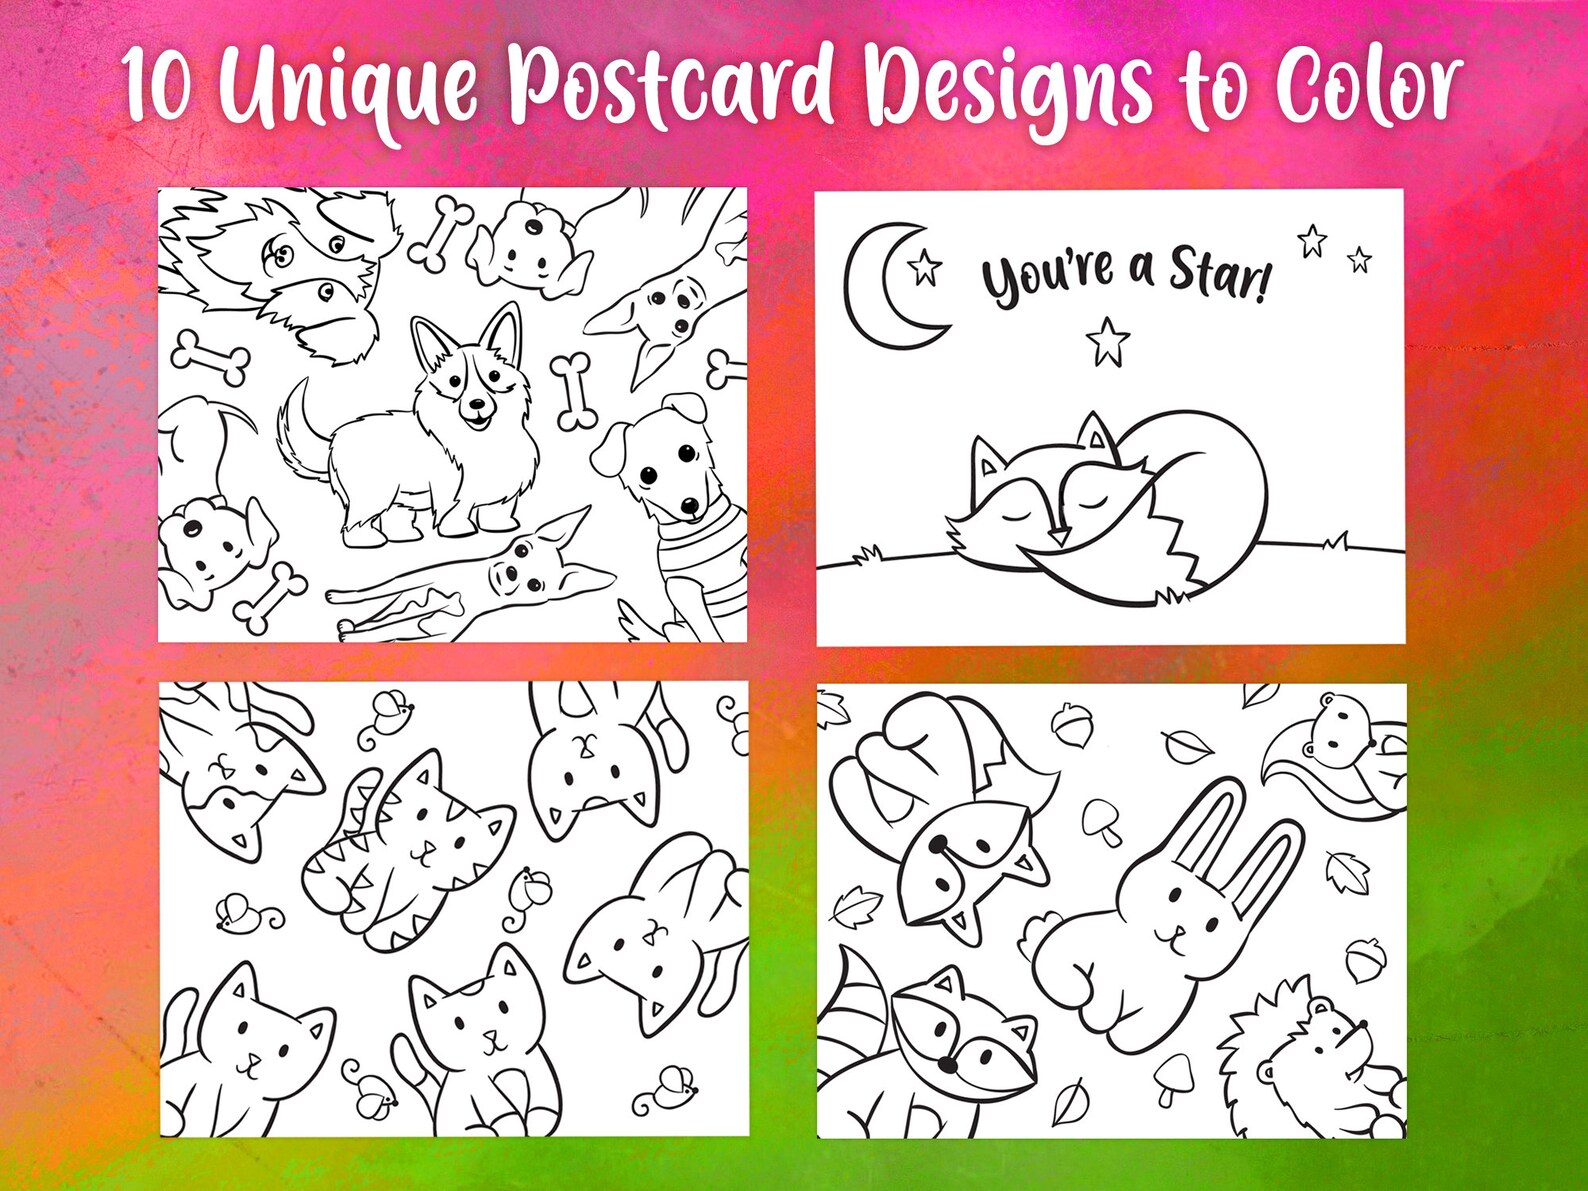 printable-color-your-own-postcards-set-of-10-cards-to-color-etsy